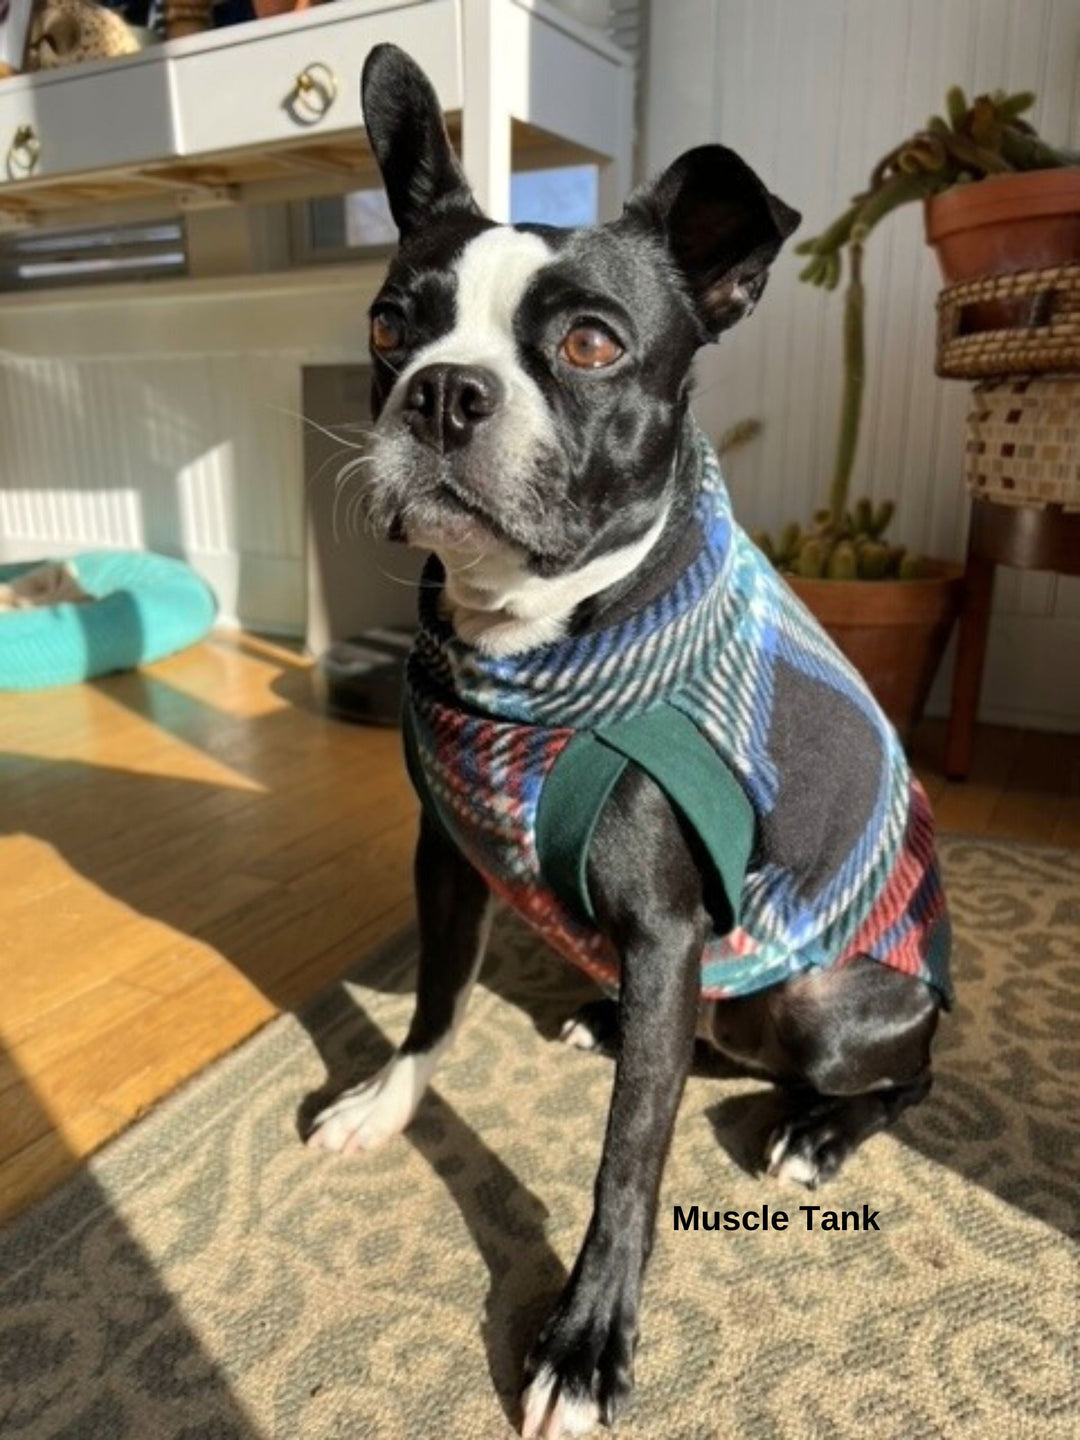 Boston Terrier wearing a navy plaid fleece pullover dog sweater by Jax & Molly's